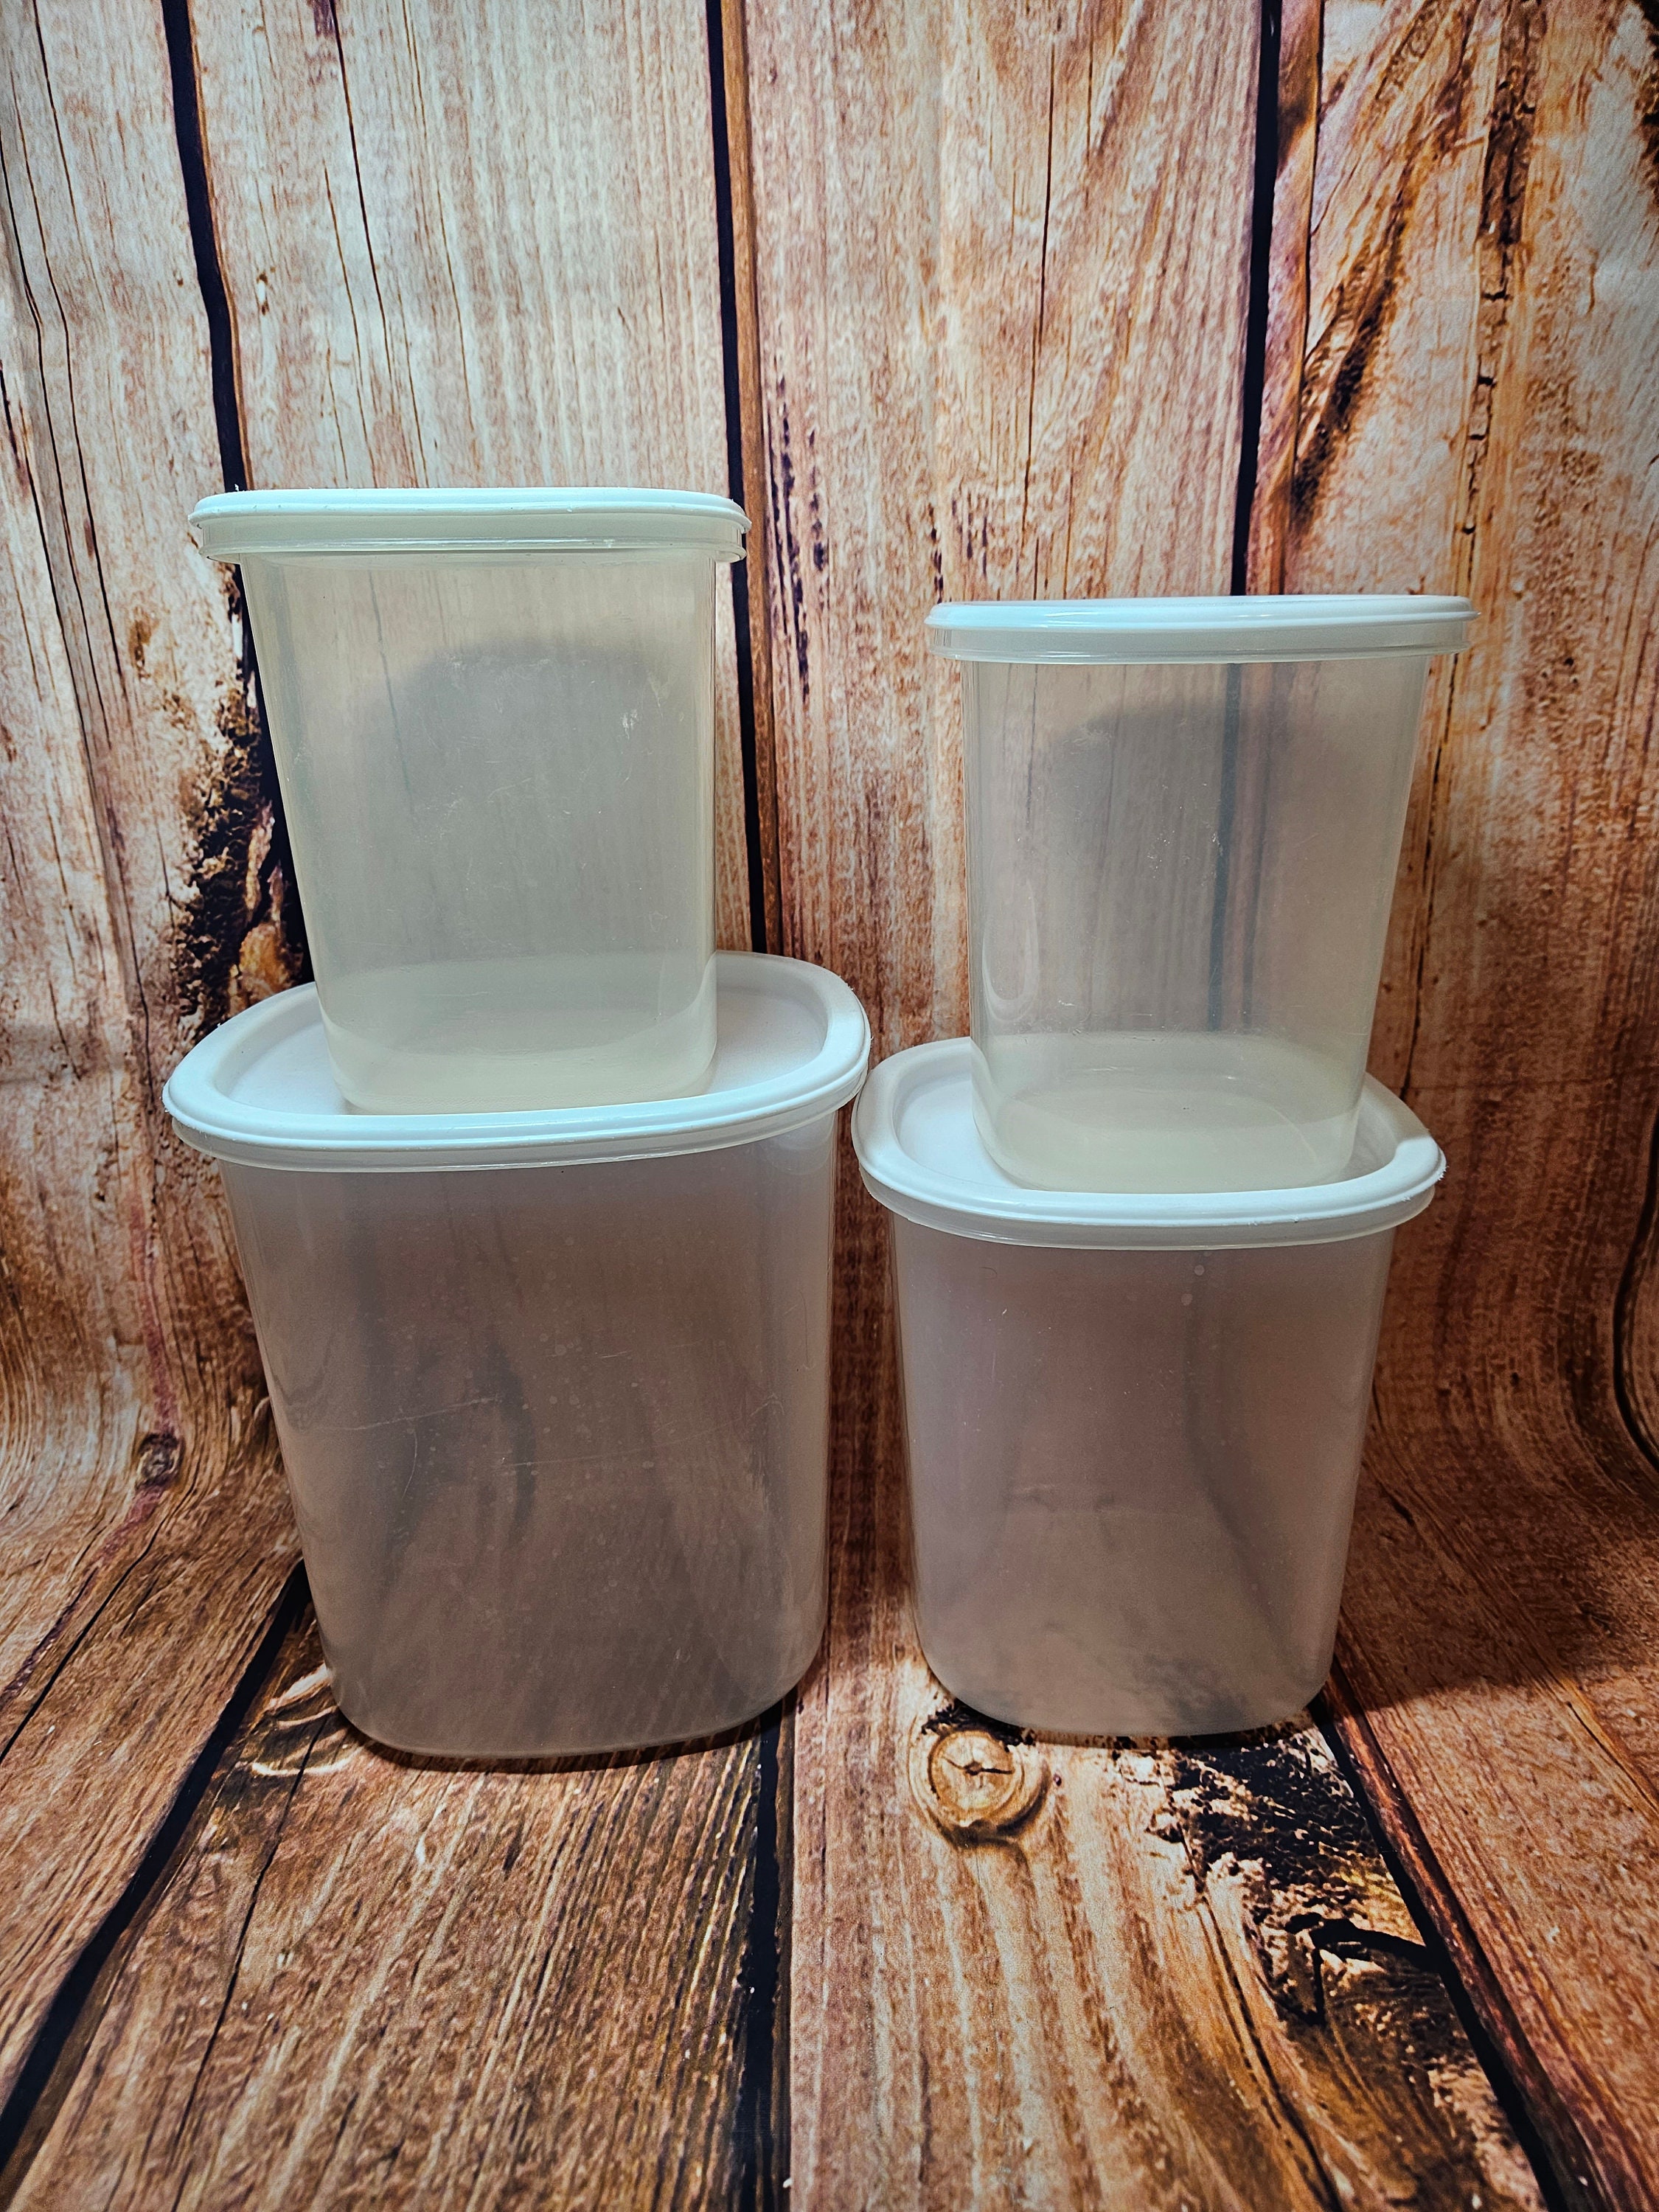 Tupperware Bread keeper, hinged lid, insert, #3 -17 cups Made in USA